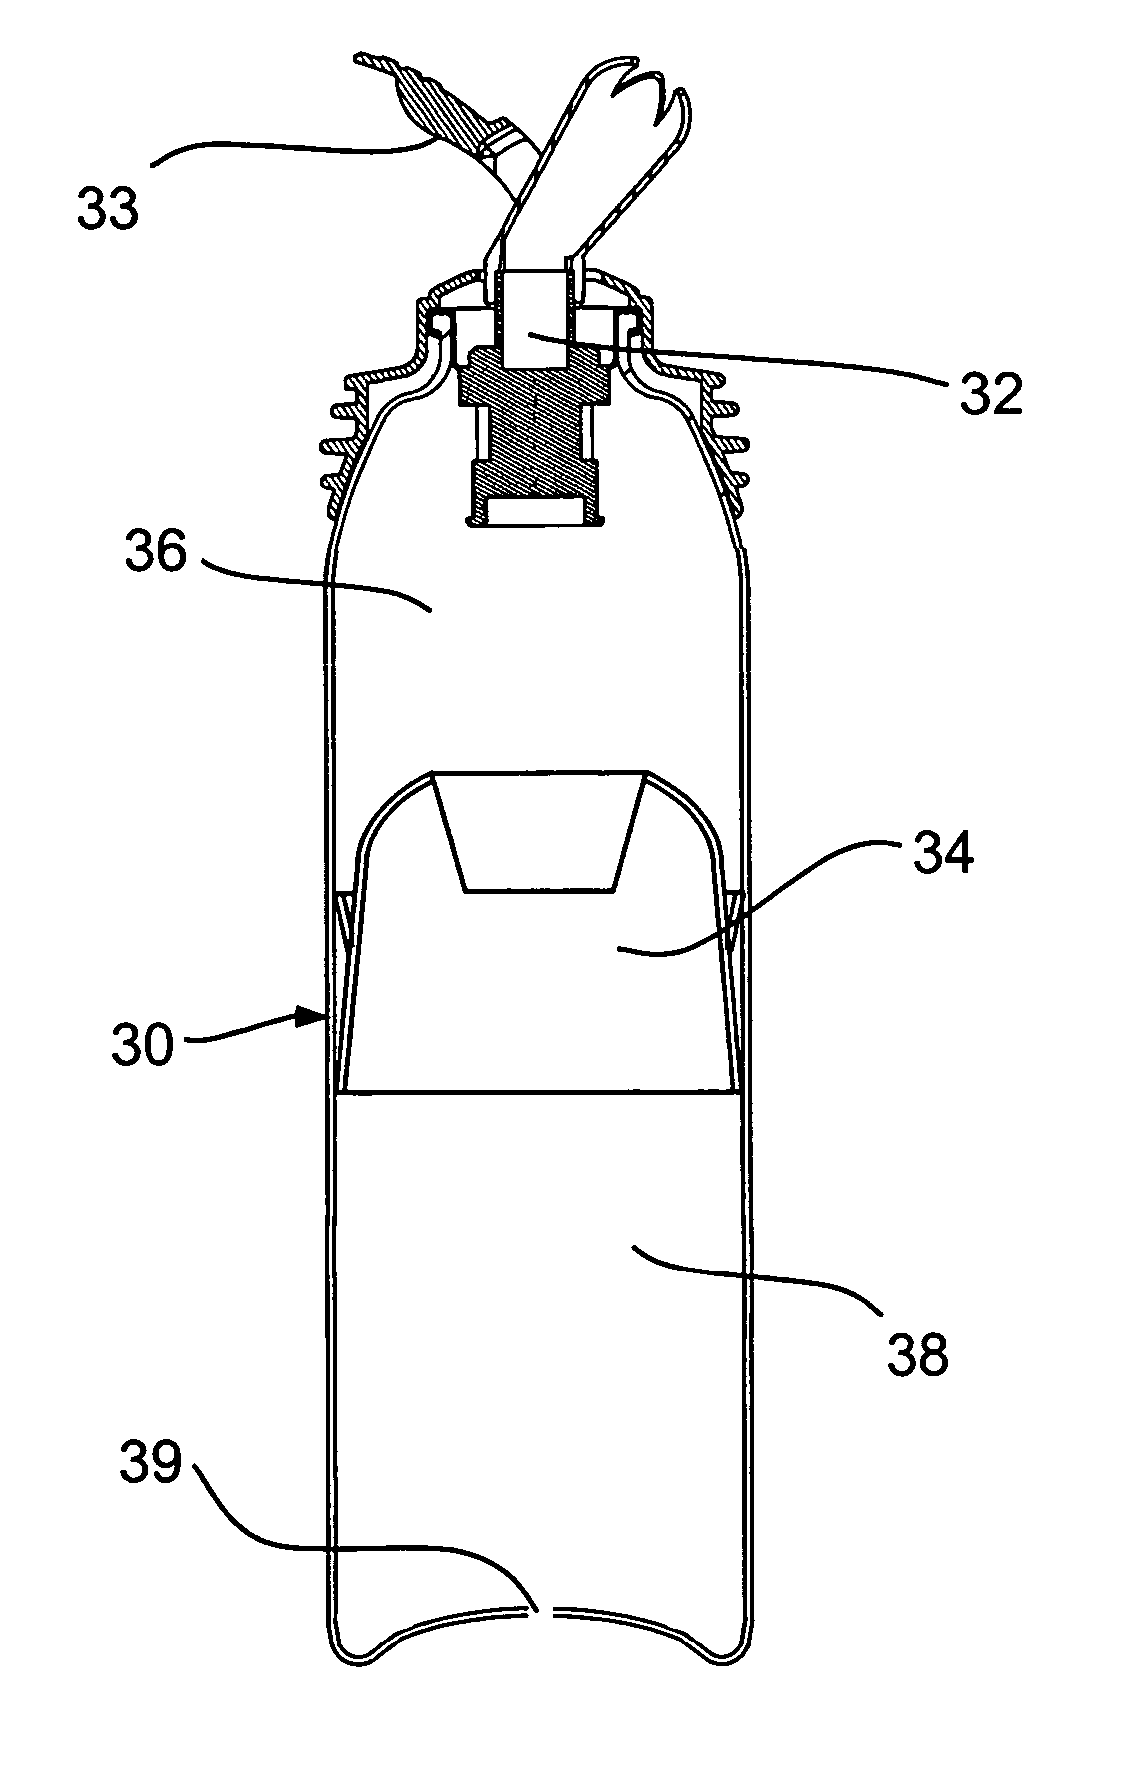 Frozen aerated product in a container and a valve for dispensing such